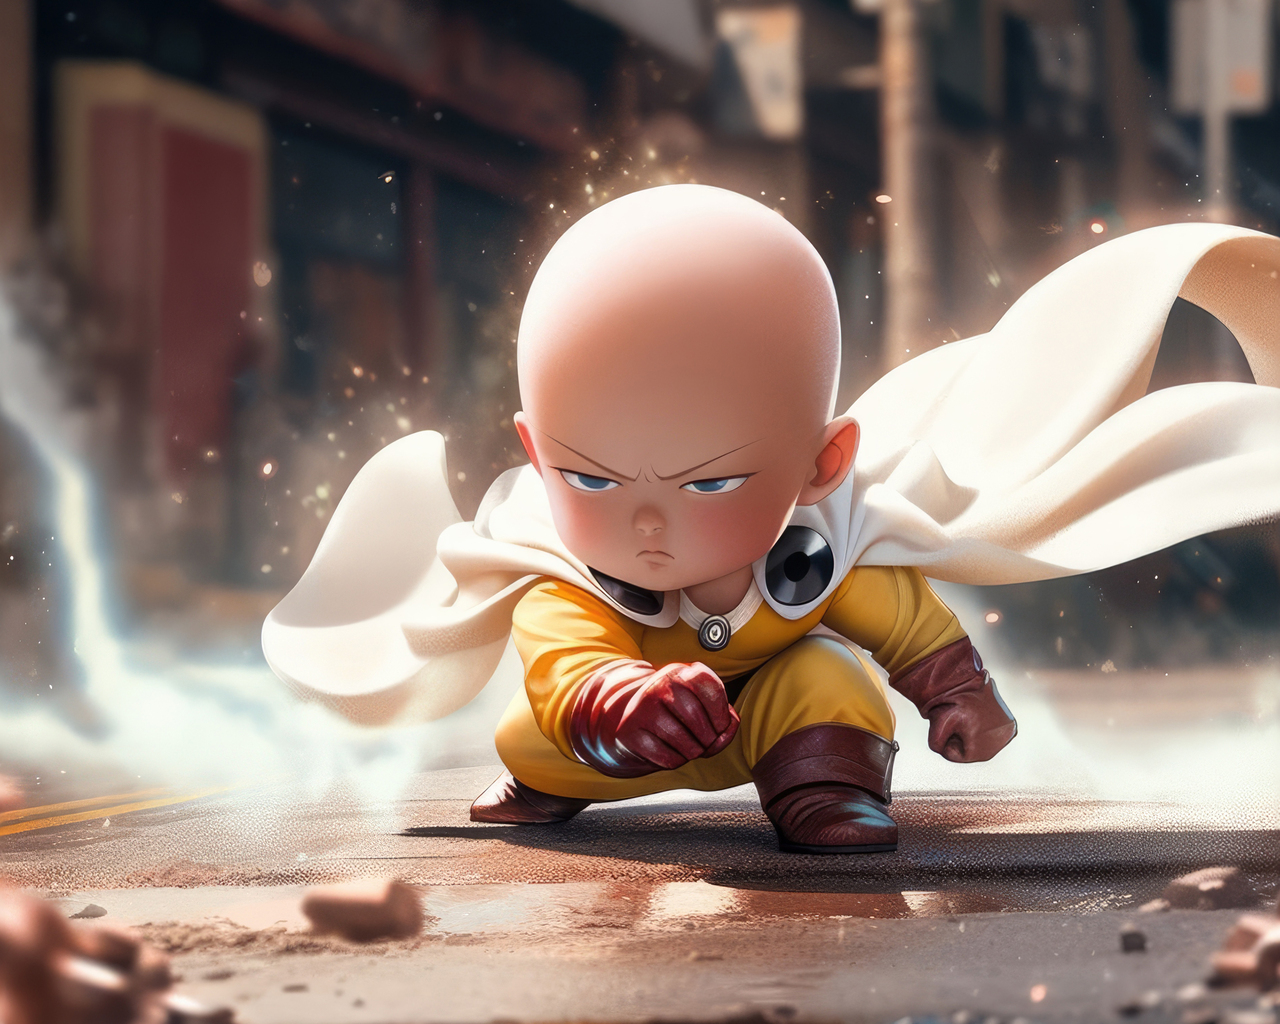 Download One Punch Man Wallpaper